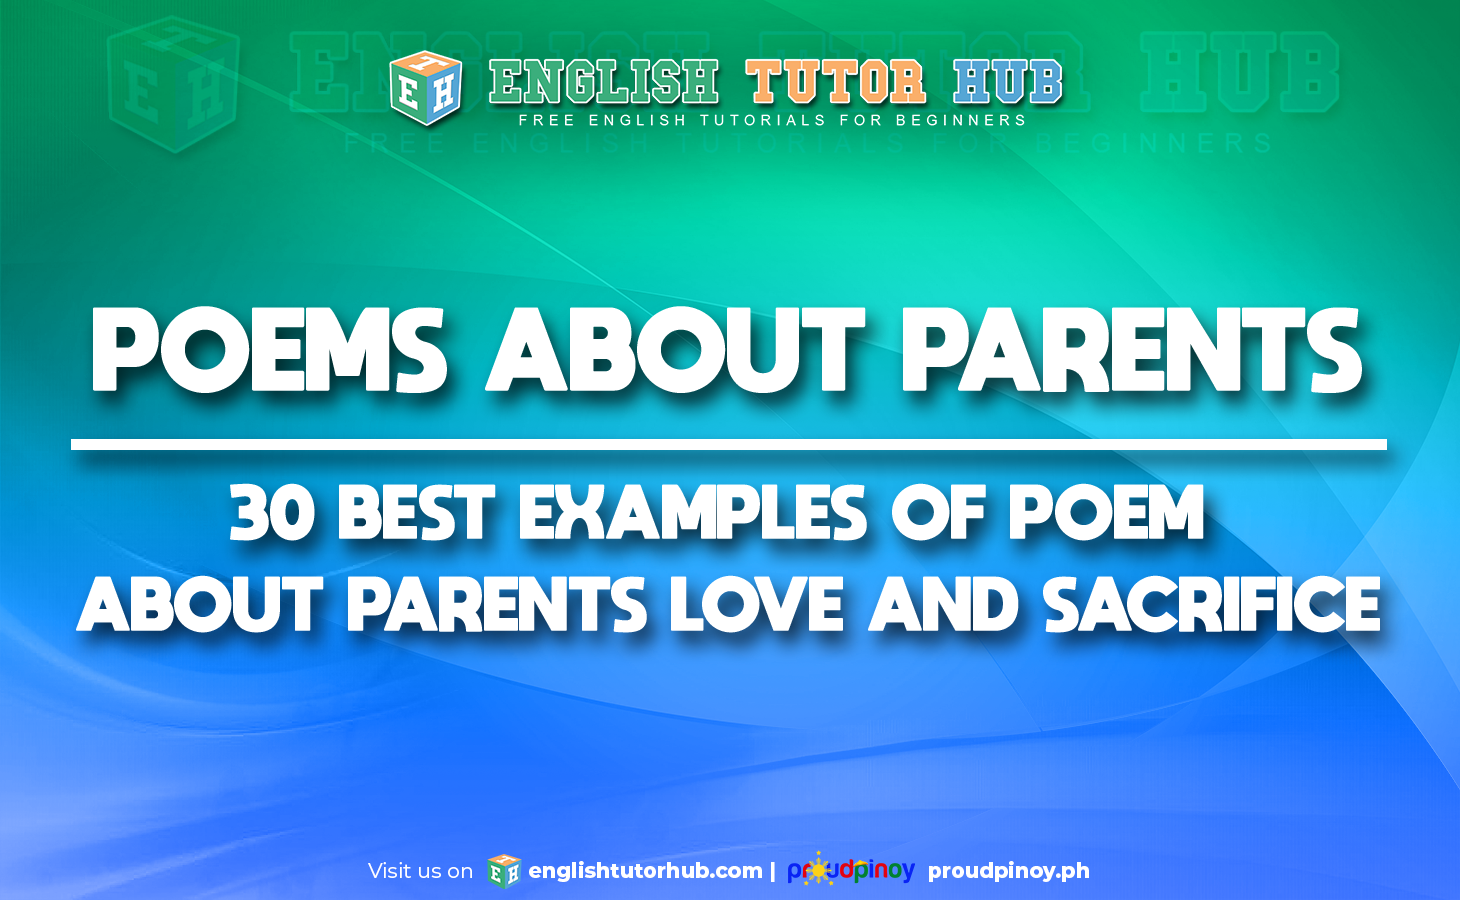 POEMS ABOUT PARENTS - 30 BEST EXAMPLES OF POEM ABOUT PARENTS LOVE AND SACRIFICE